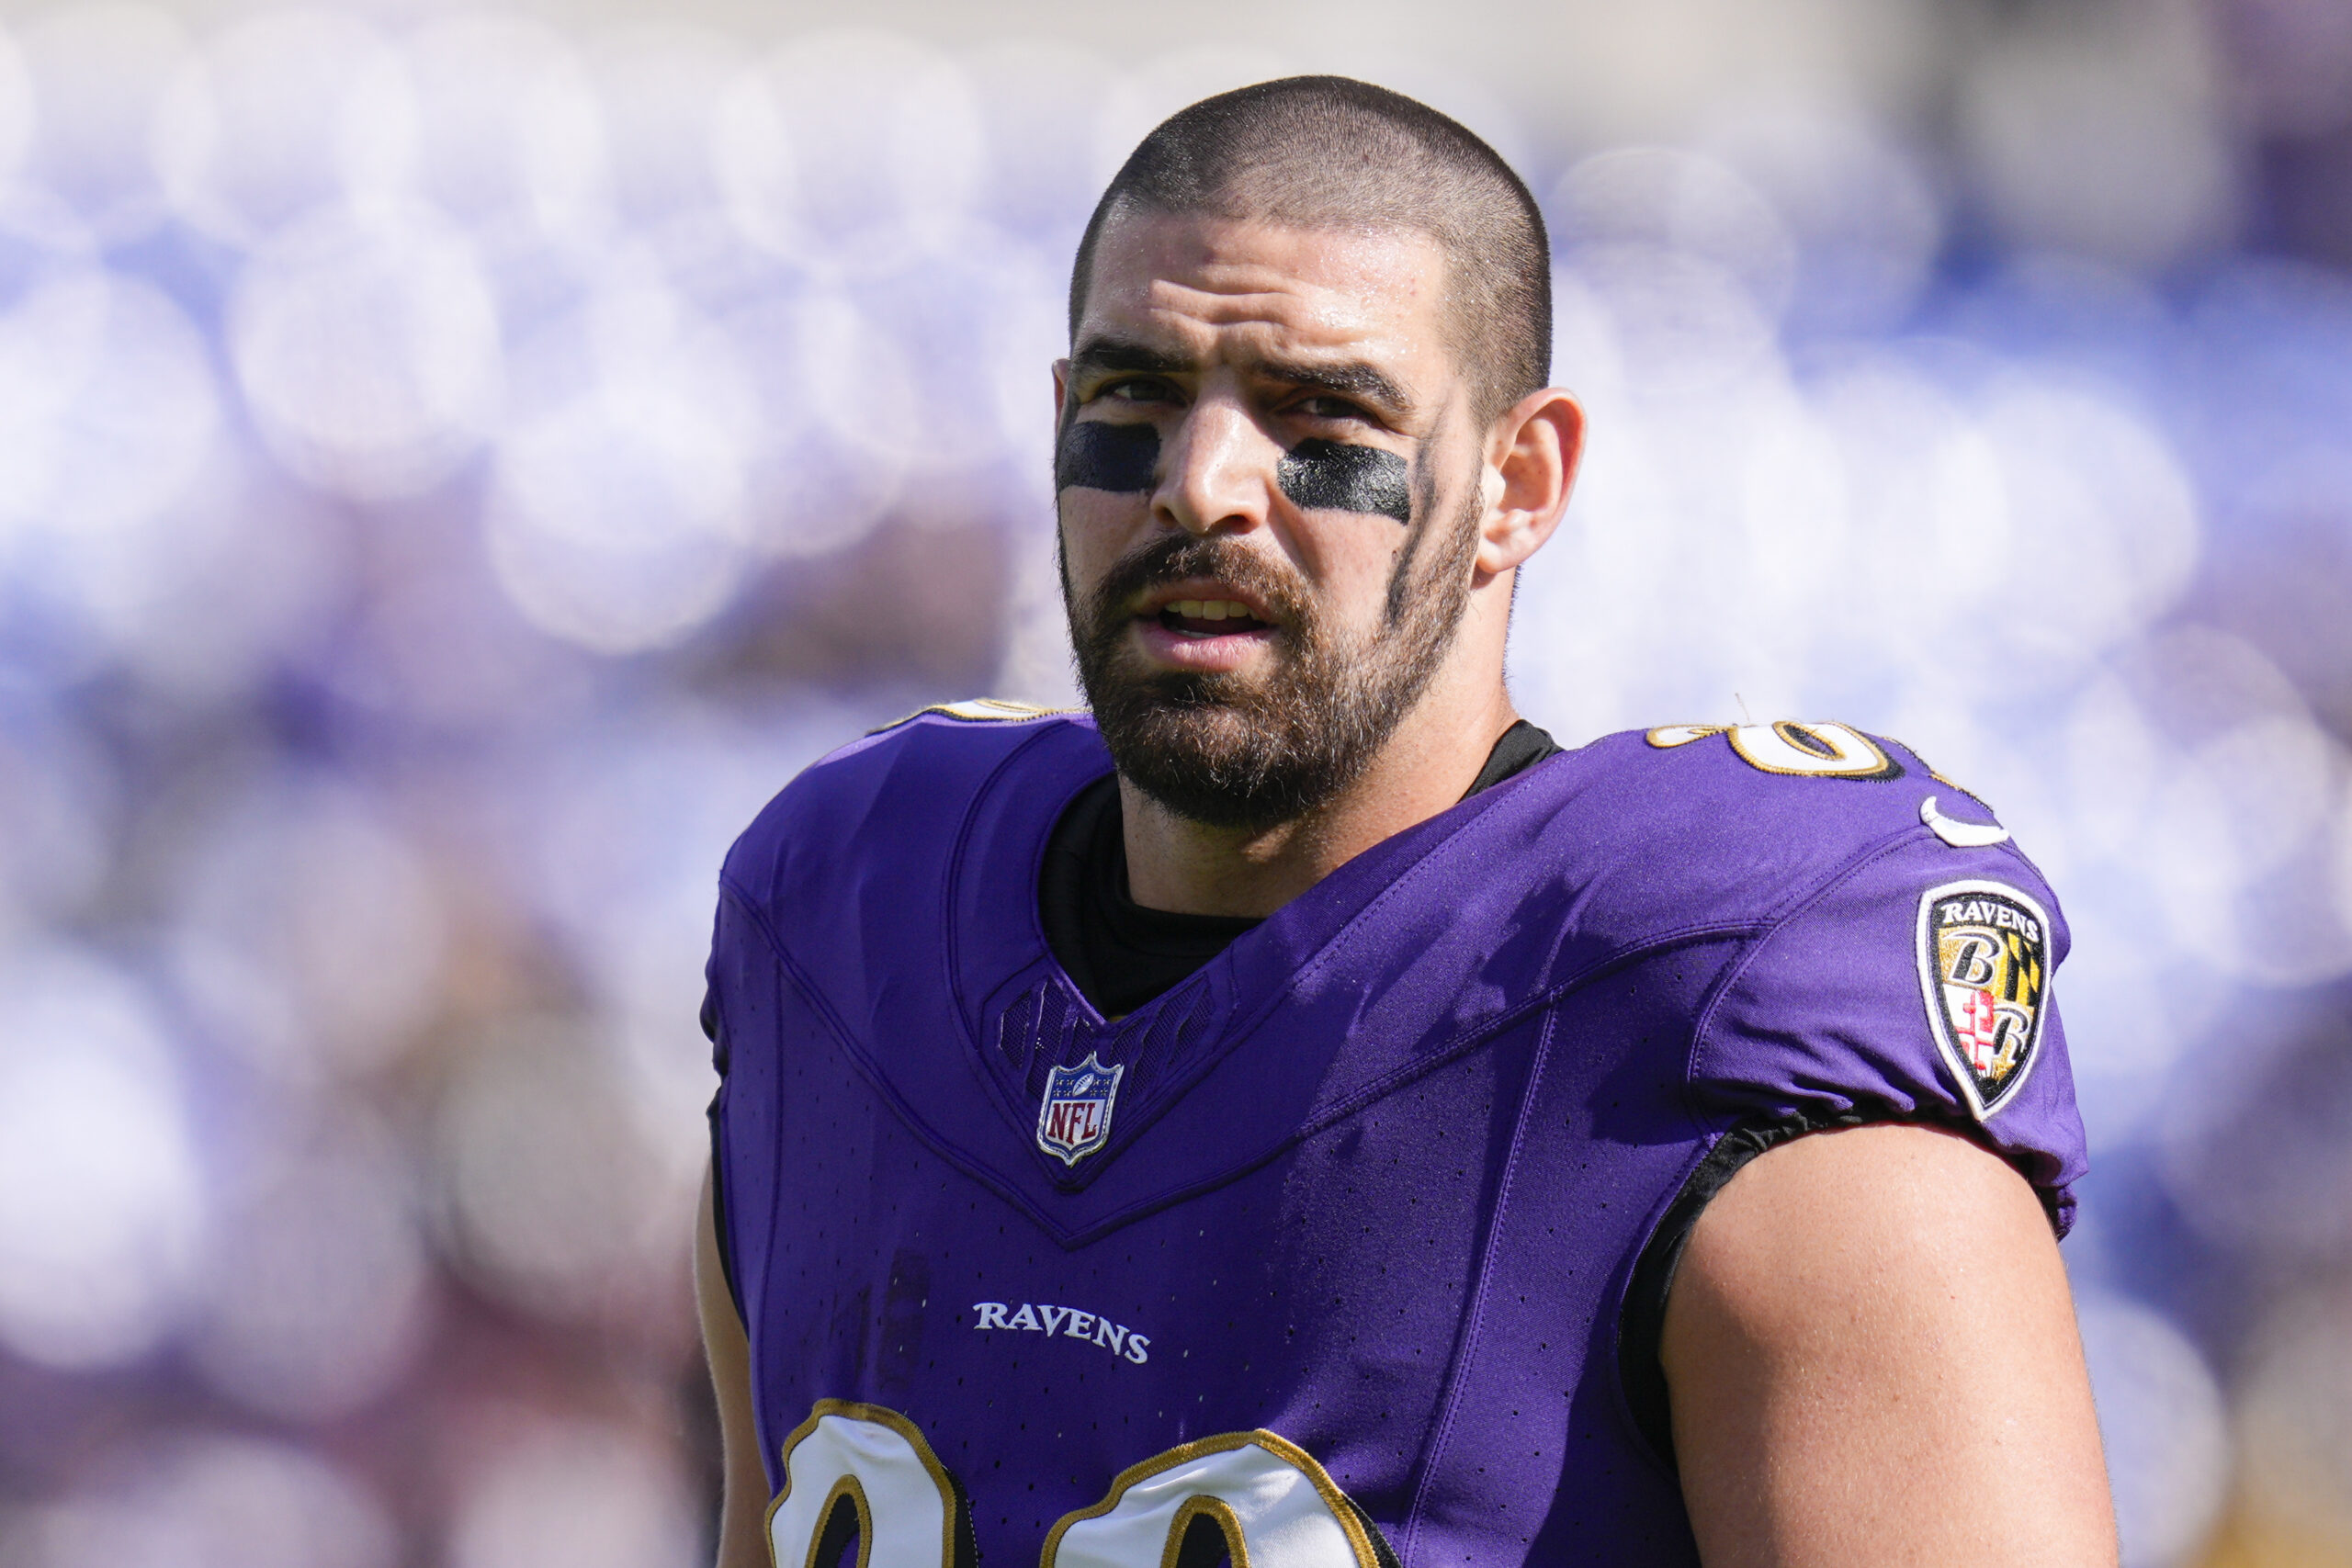 Baltimore Ravens' tight end Mark Andrews stands on the field with his helmet off